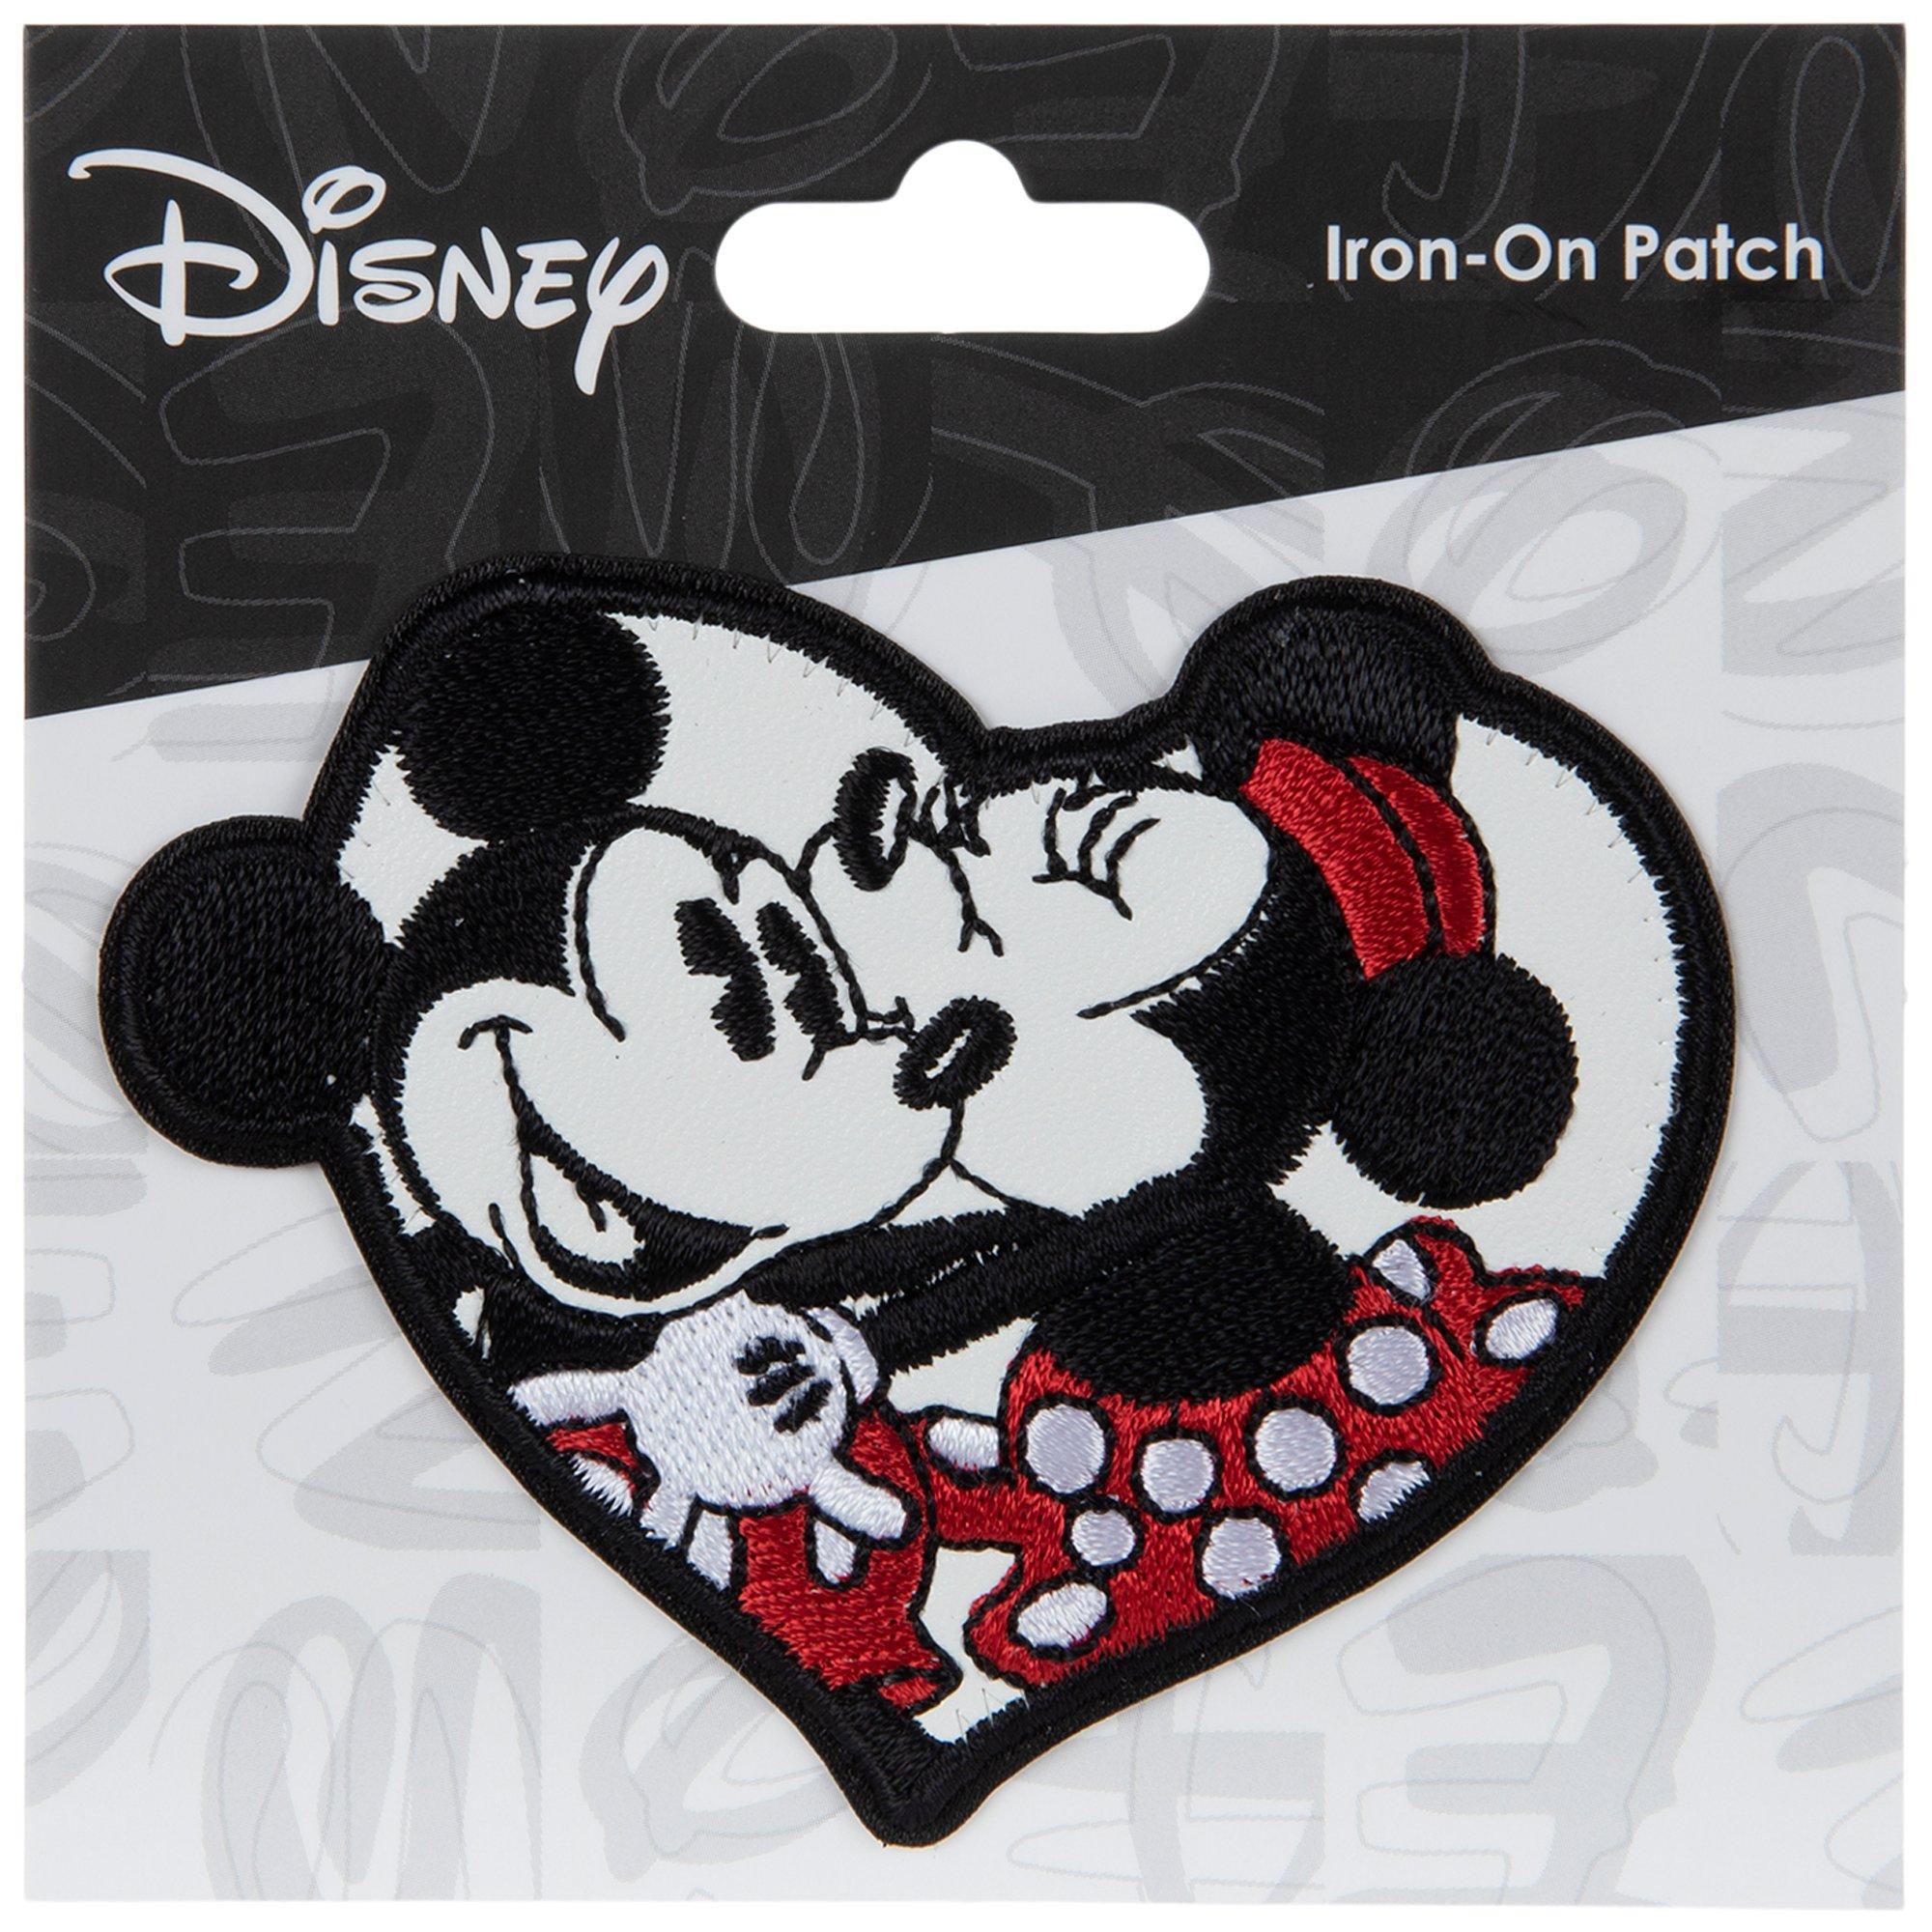 HUGE Minnie Mouse Iron on Patch Disney